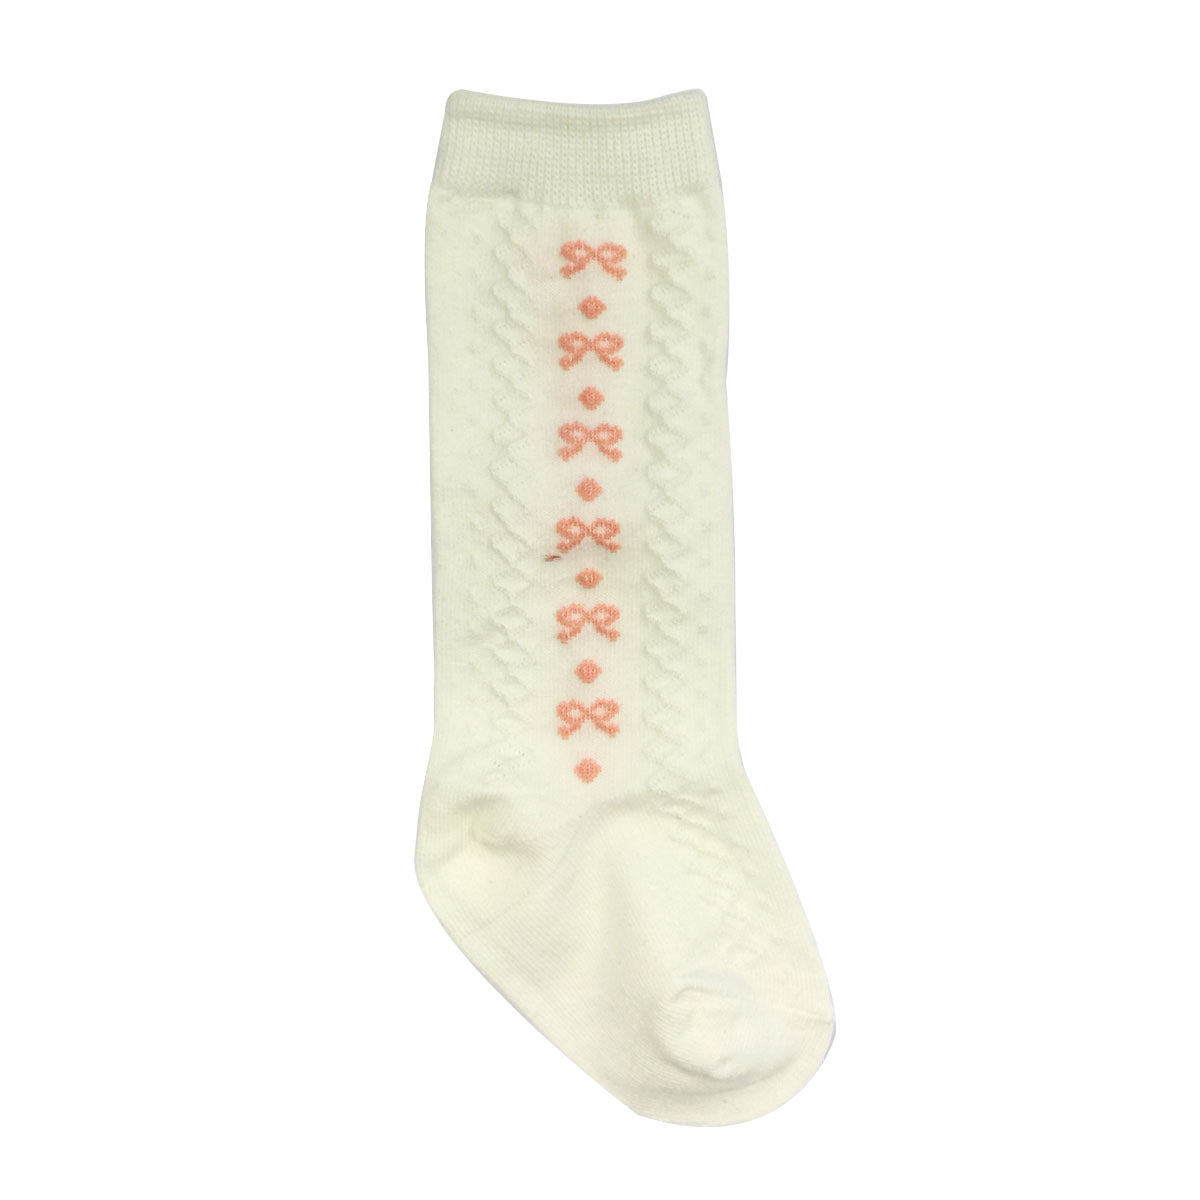 Wrapables My Sweetheart Knee High Baby Socks (Set of 3)